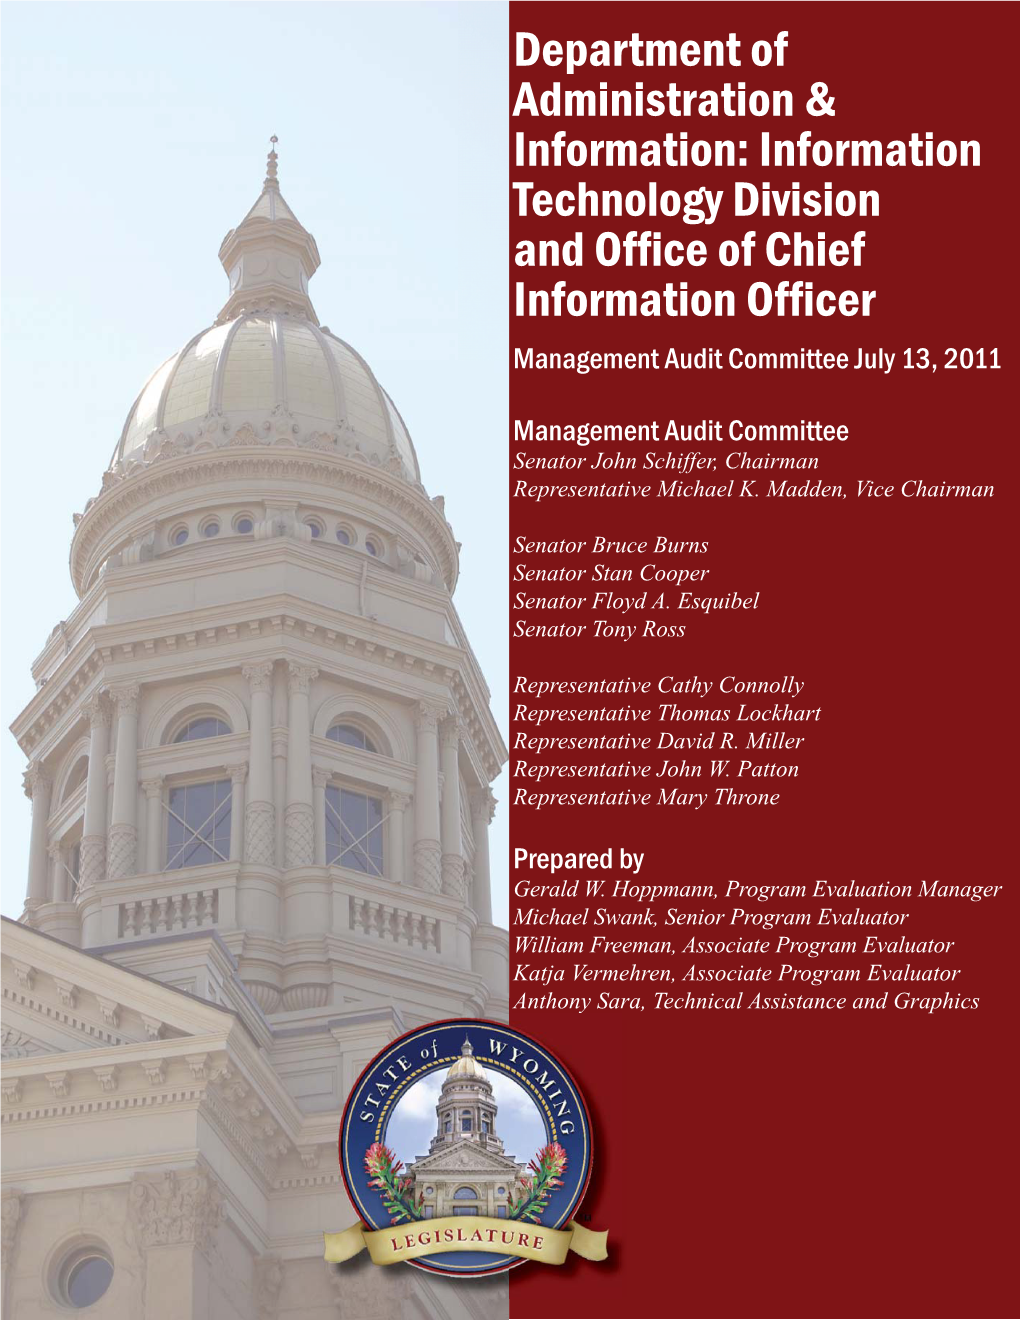 Information Technology Division and Office of Chief Information Officer